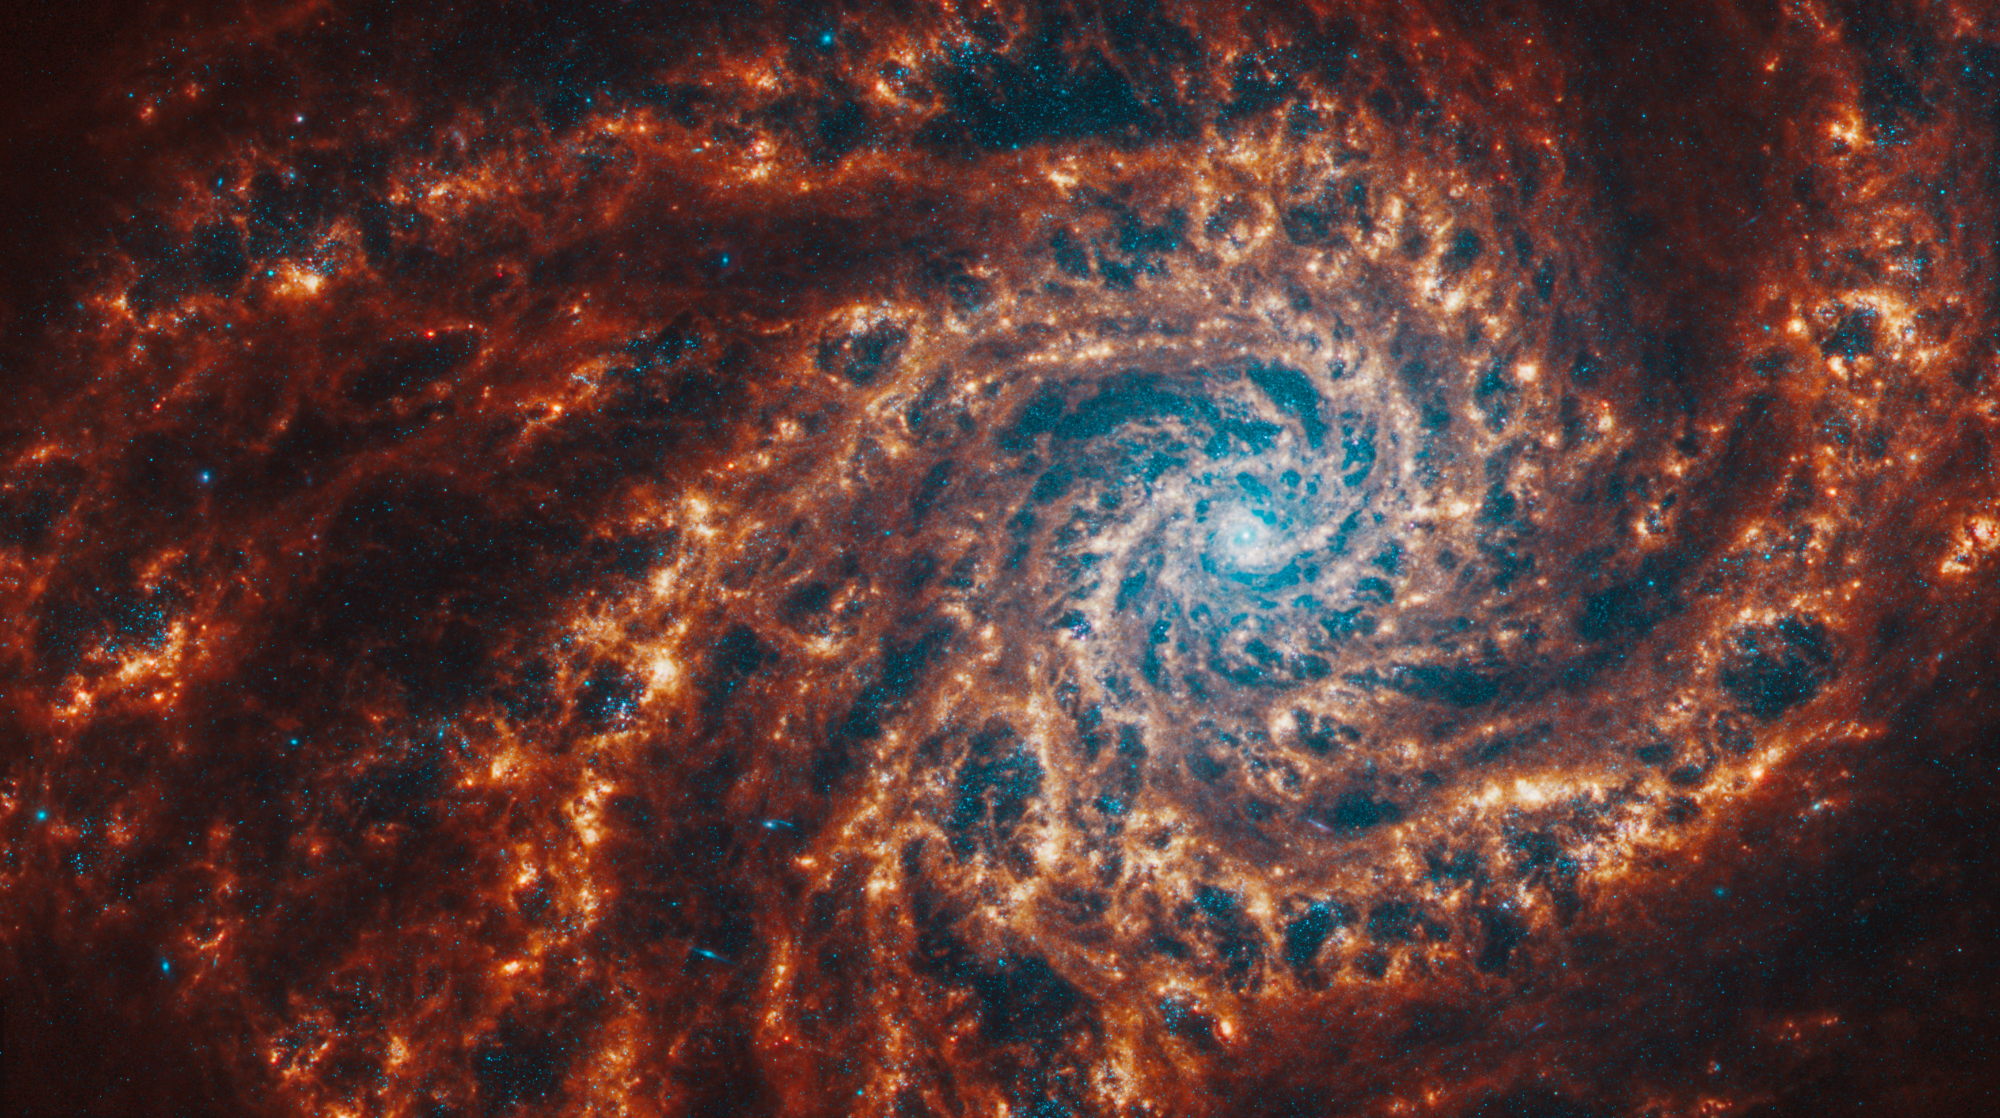 Webb's image of NGC 4254 shows a densely populated face-on spiral galaxy anchored by its central region, which has a light blue haze that takes up about a quarter of the view. In this circular core is the brightest blue area. Within the core are populations of older stars, represented by many pinpoints of blue light. Spiny spiral arms made of stars, gas, and dust also start at the center, largely starting in the wider area of the blue haze. The spiral arms extend to the edges, rotating counterclockwise. The spiraling filamentary structure looks somewhat like a cross section of a nautilus shell. The arms of the galaxy are largely orange, ranging from dark to bright orange. Scattered across the packed scene are some additional bright blue pinpoints of light, which are stars spread throughout the galaxy. In areas where there is less orange, it is darker, and some dark regions look more circular.